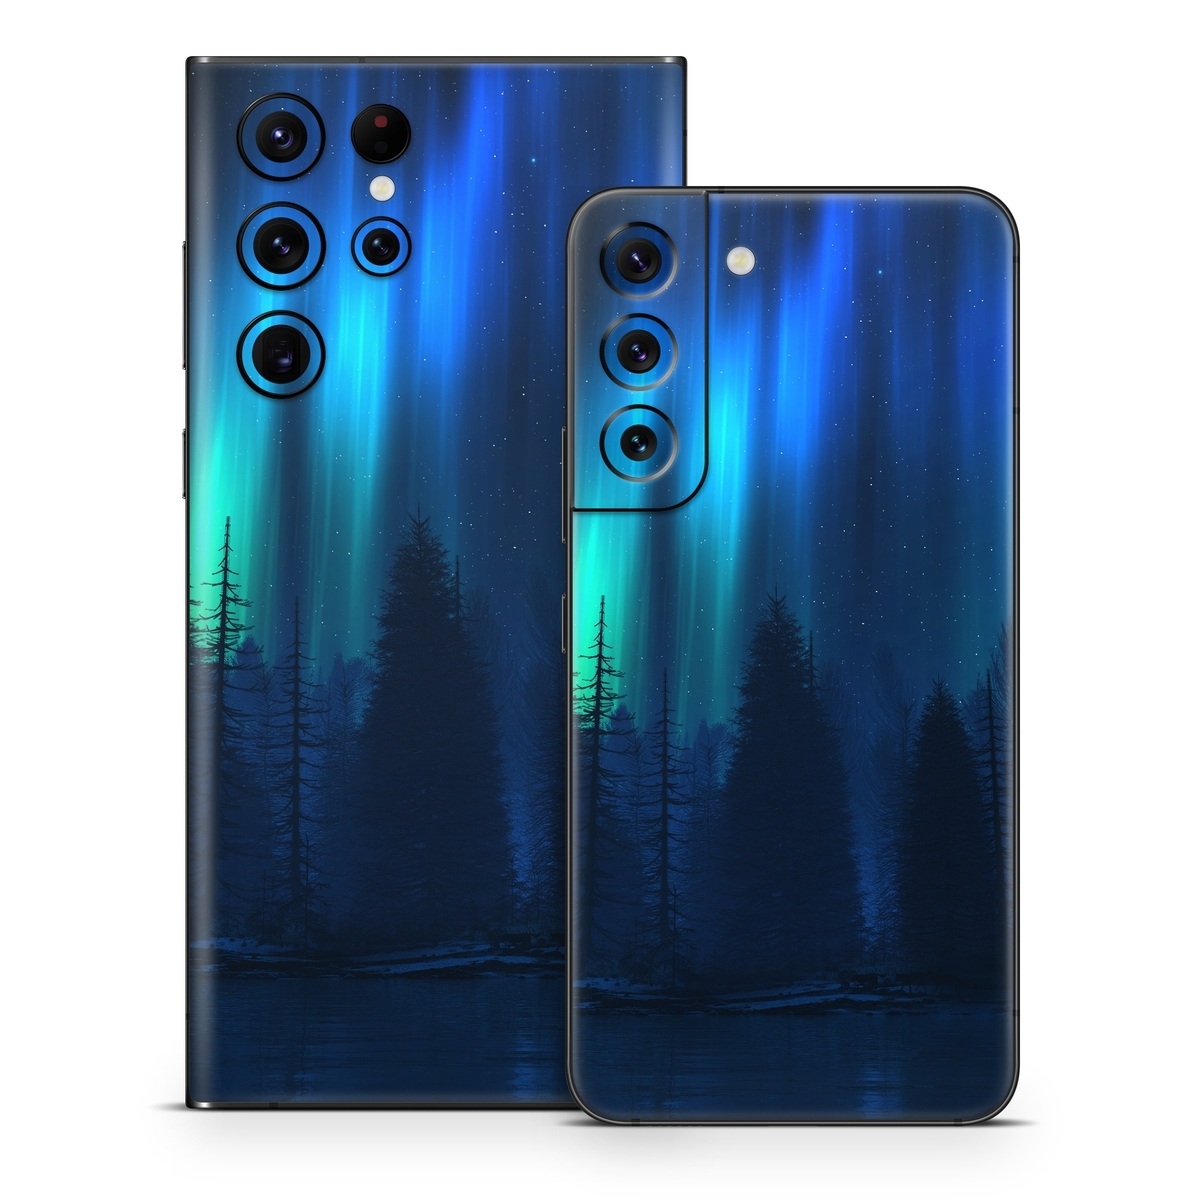  Skin design of Blue, Light, Natural environment, Tree, Sky, Forest, Darkness, Aurora, Night, Electric blue, with black, blue colors